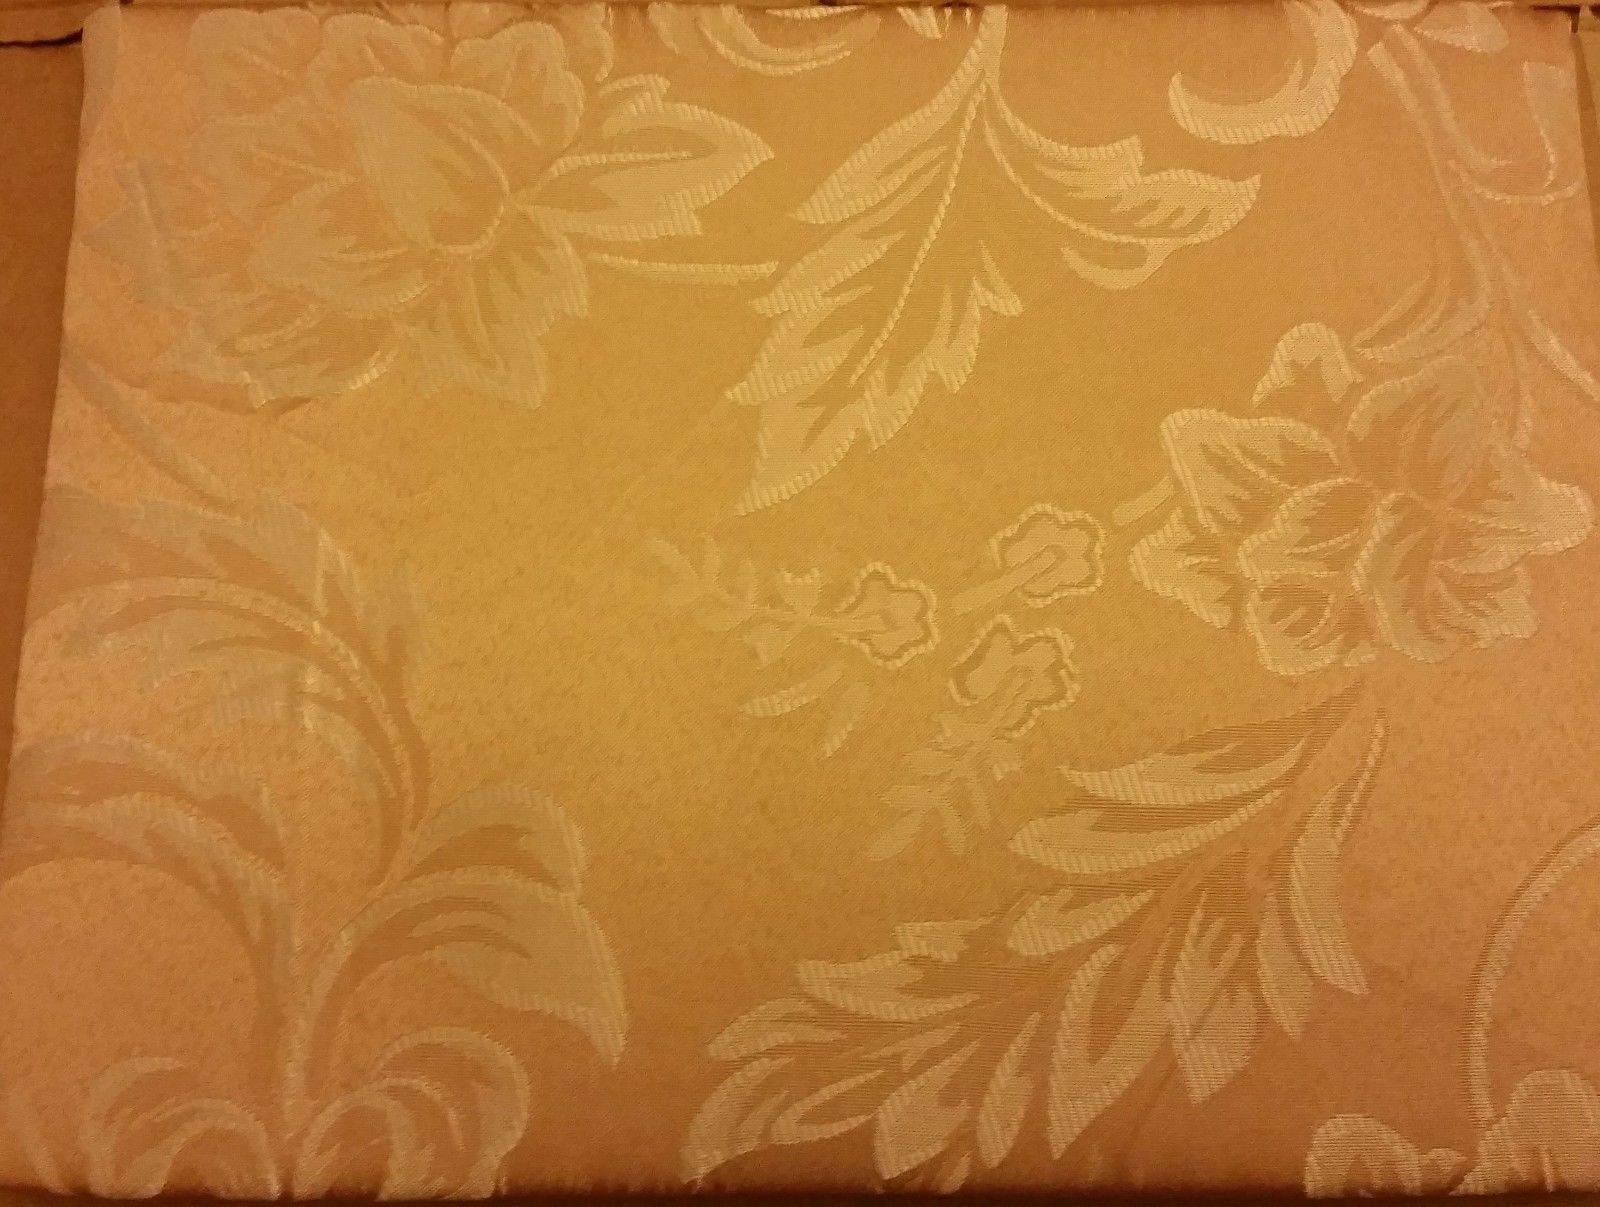 Primary image for DAMASK LINEN Tablecloth 60"x84" OBLONG (6-8 ppl) FLOWERS ON GOLD/DARK BEIGE, BH